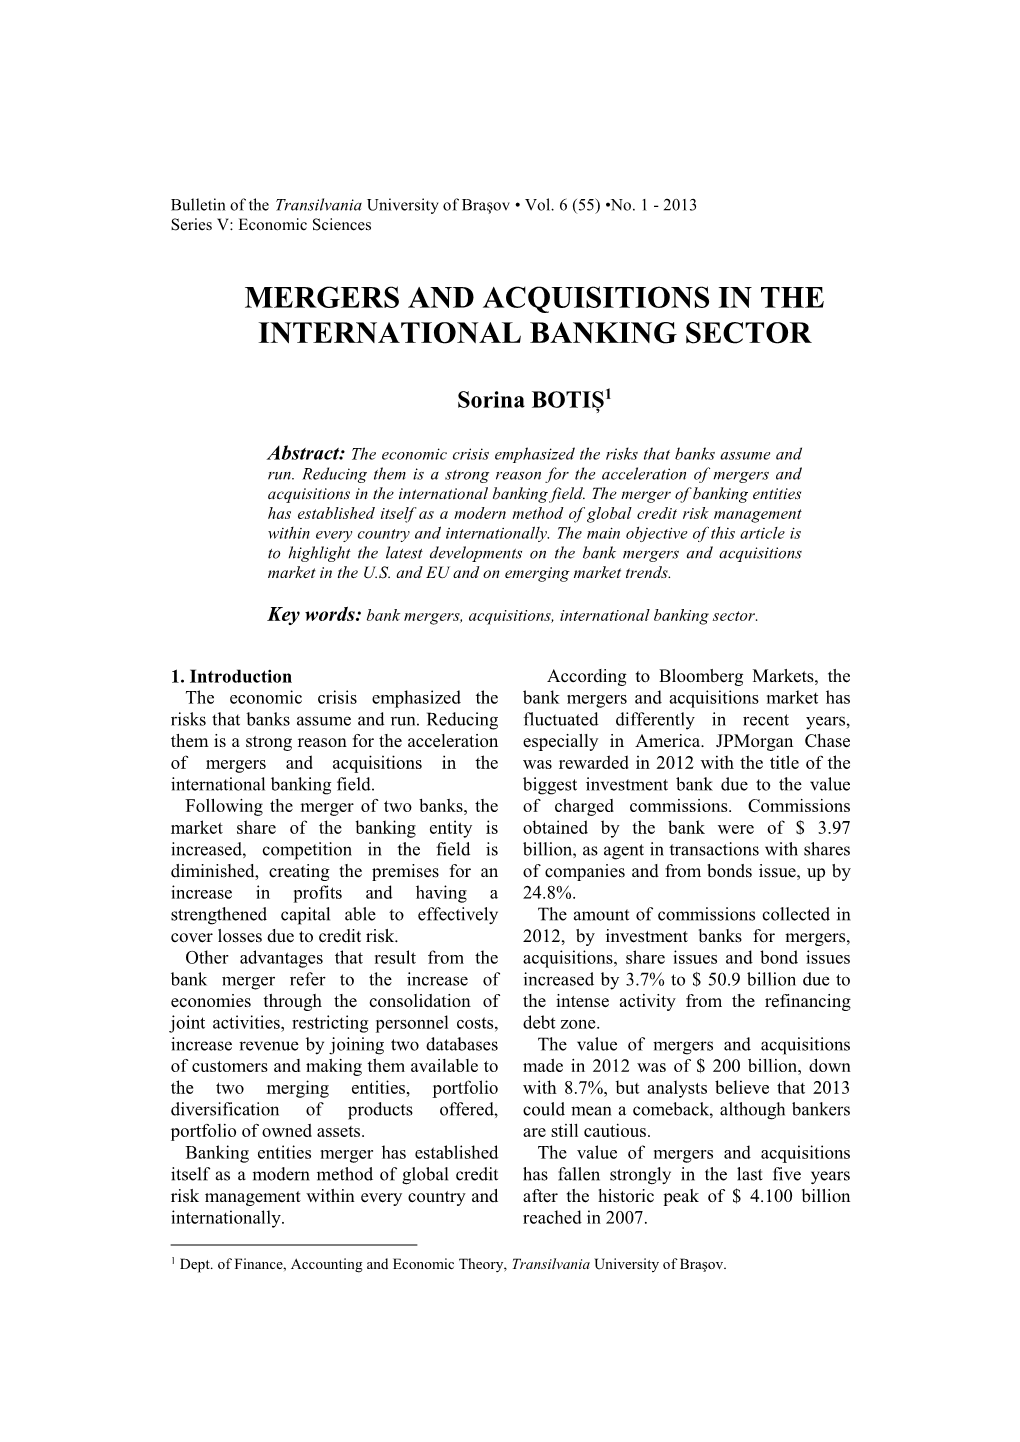 Mergers and Acquisitions in the International Banking Sector